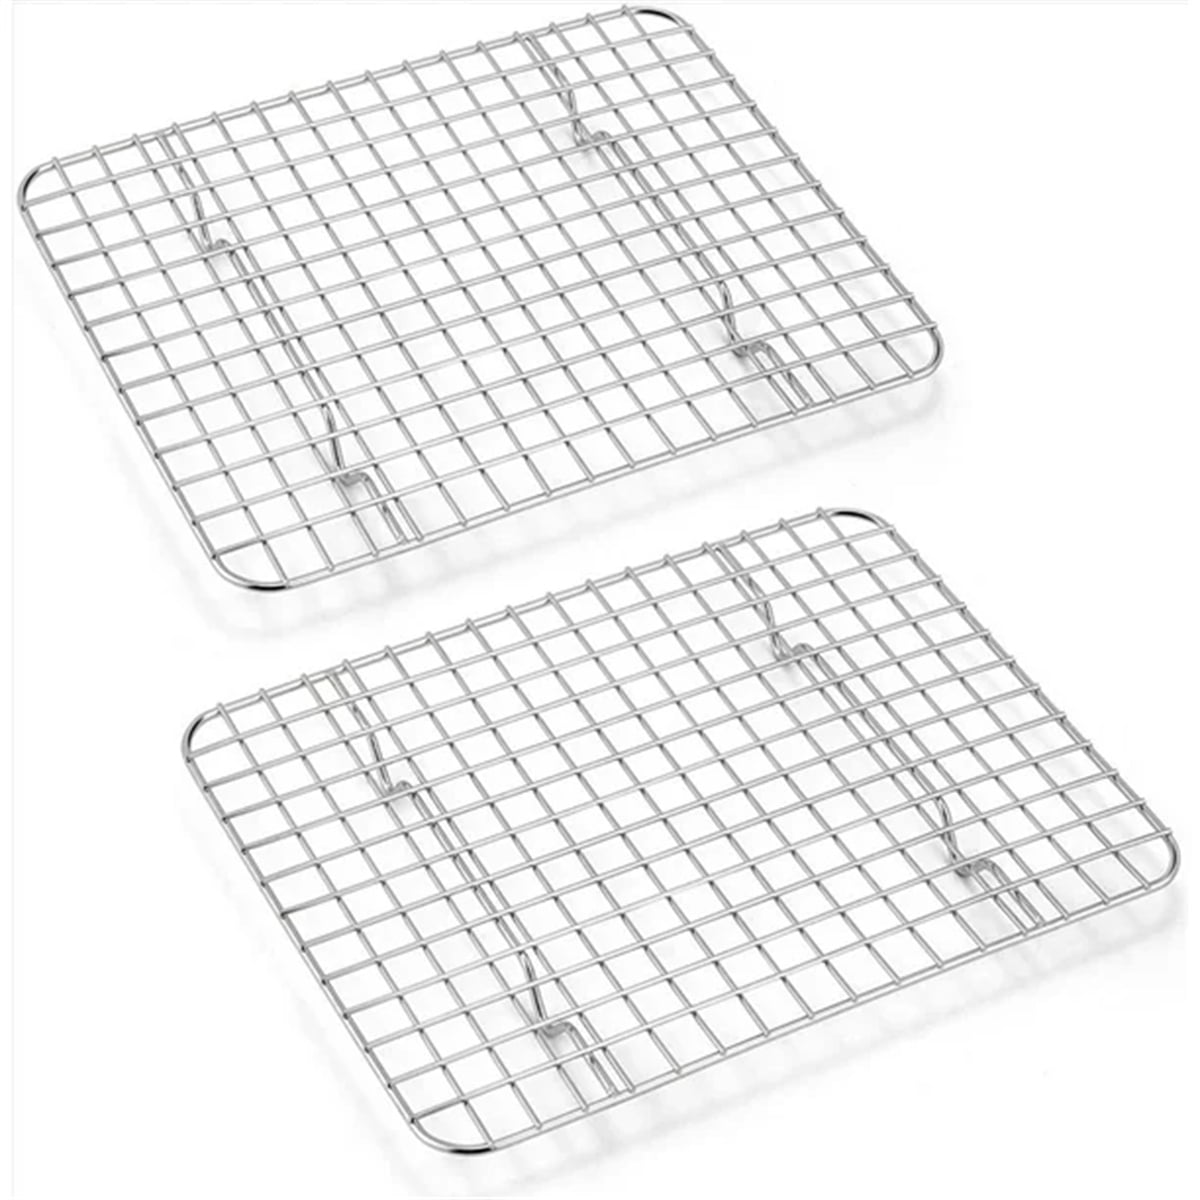 KITCHENATICS Jelly Roll Cooling Rack for Baking, Heavy-Duty Stainless Steel  Baking Rack, Oven Safe Wire Rack for Cooking, Food-Safe Bacon Rack, Cookie